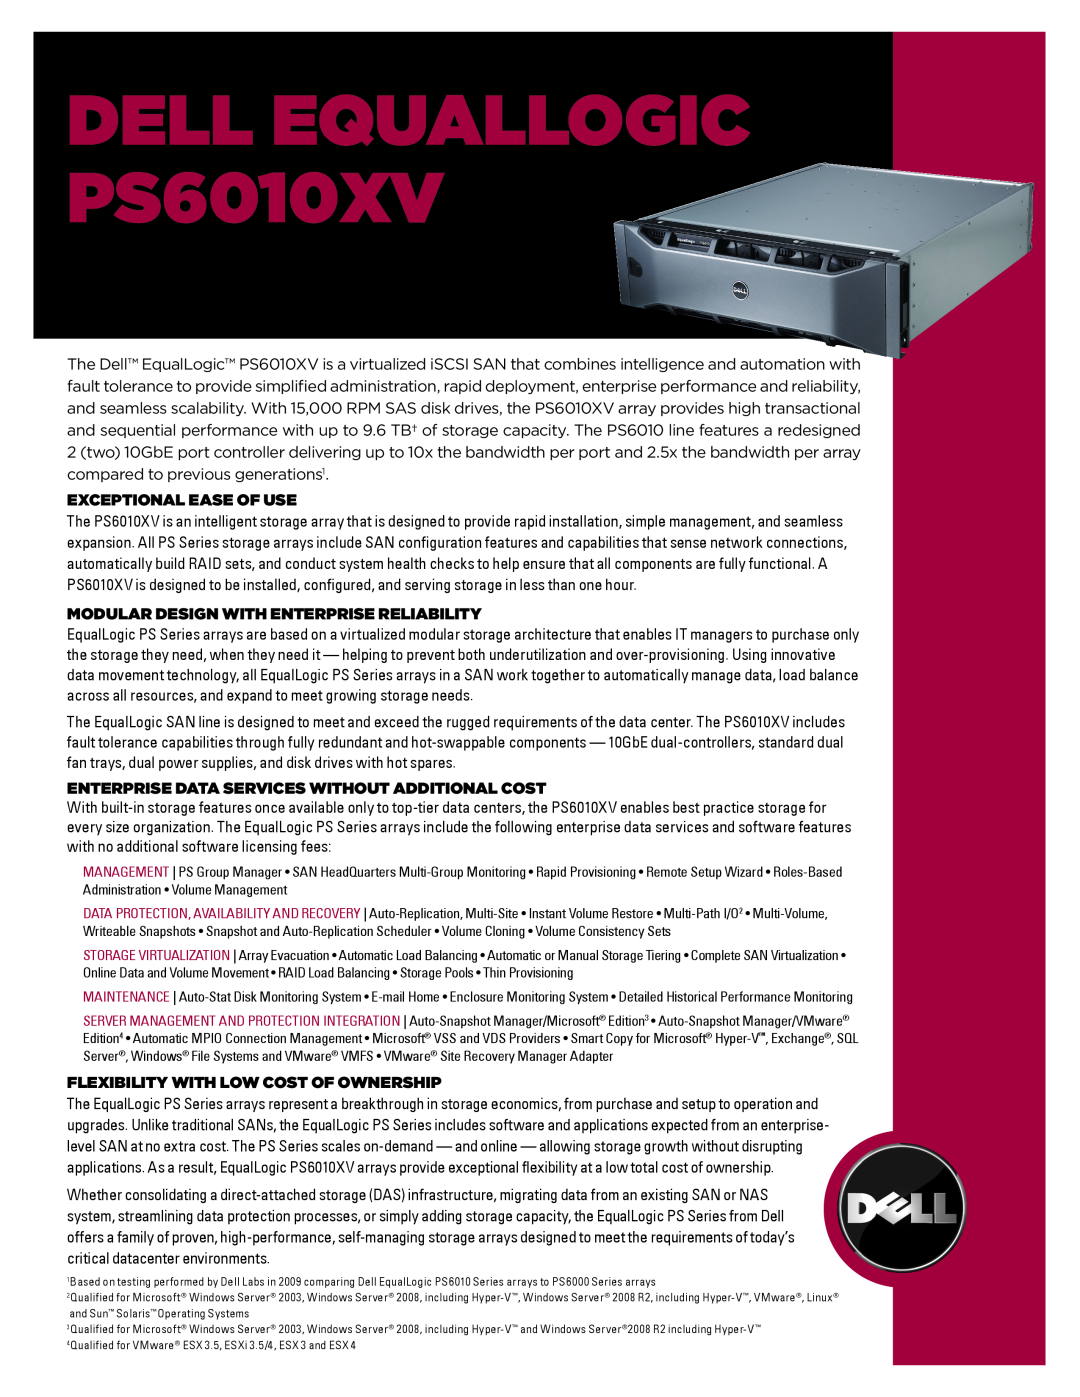 Dell manual DELL EQUALLOGIC PS6010XV, Exceptional Ease Of Use, Modular Design With Enterprise Reliability 